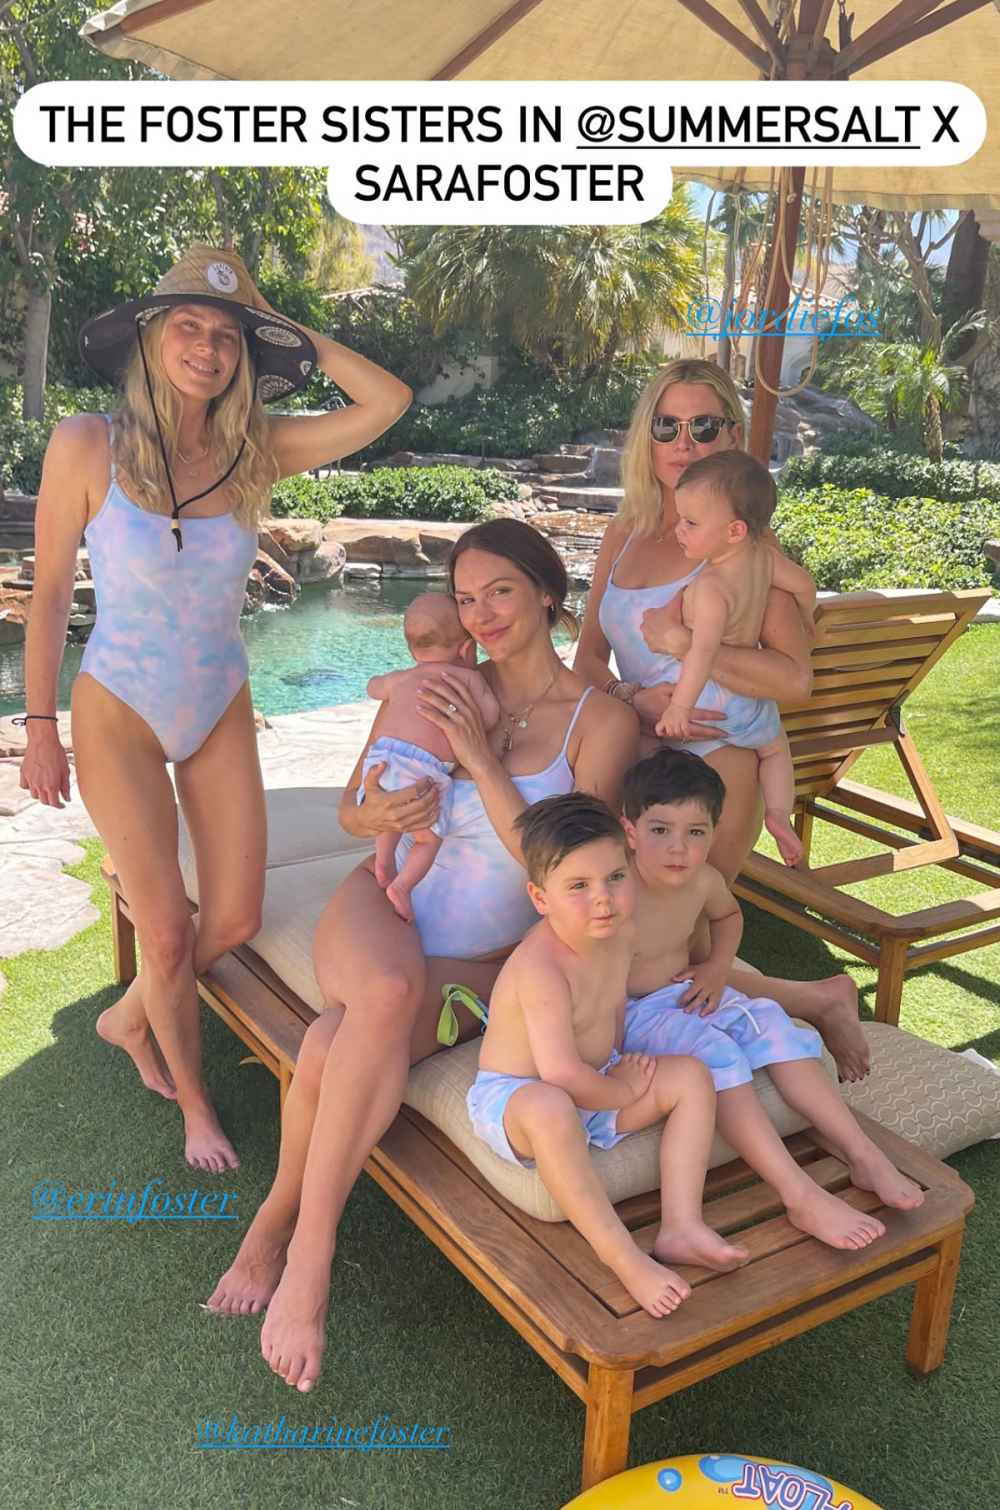 https://www.usmagazine.com/wp-content/uploads/2021/04/Katharine-McPhee-Twins-With-Baby-Boy-In-Tie-Dye-Bathing-Suits-Promo.jpg?w=1000&quality=40&strip=all